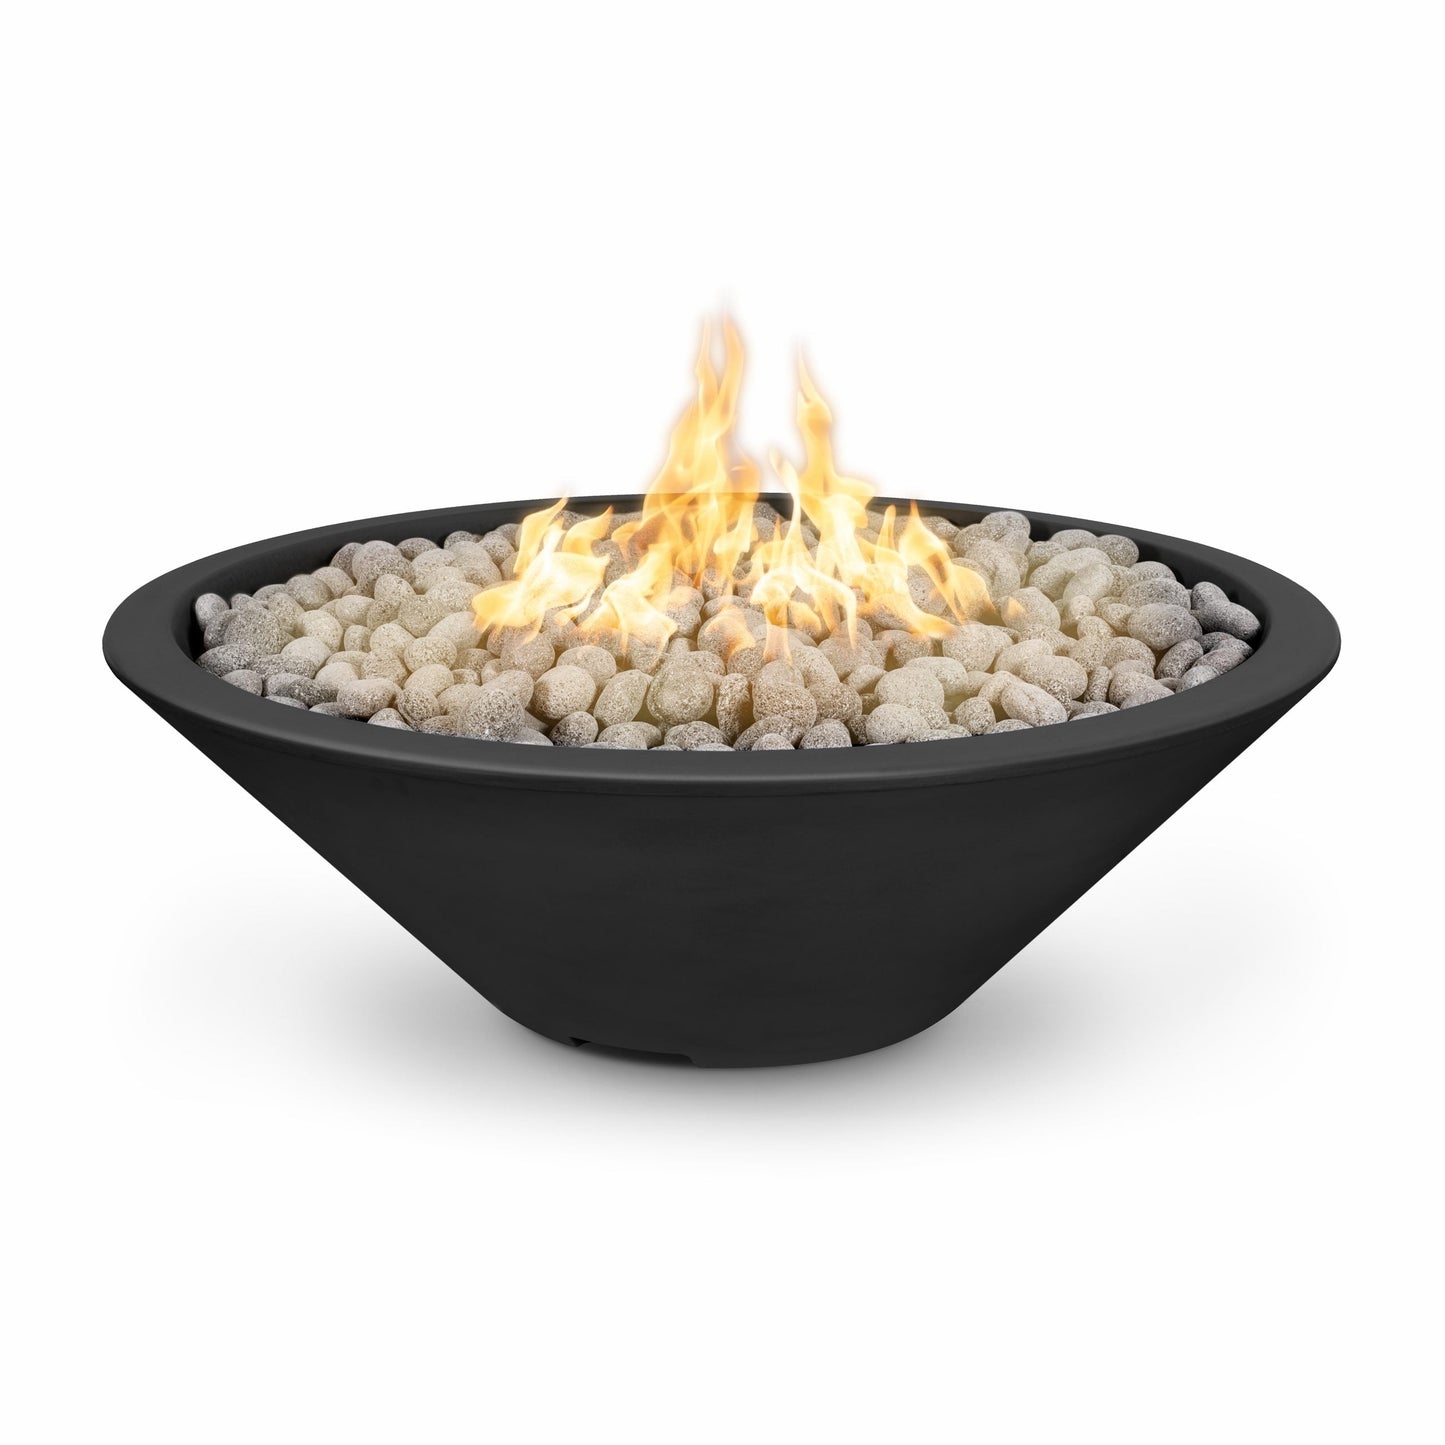 The Outdoor Plus Round Cazo 48" Silver Vein Powder Coated Metal Liquid Propane Fire Pit with Flame Sense with Spark Ignition